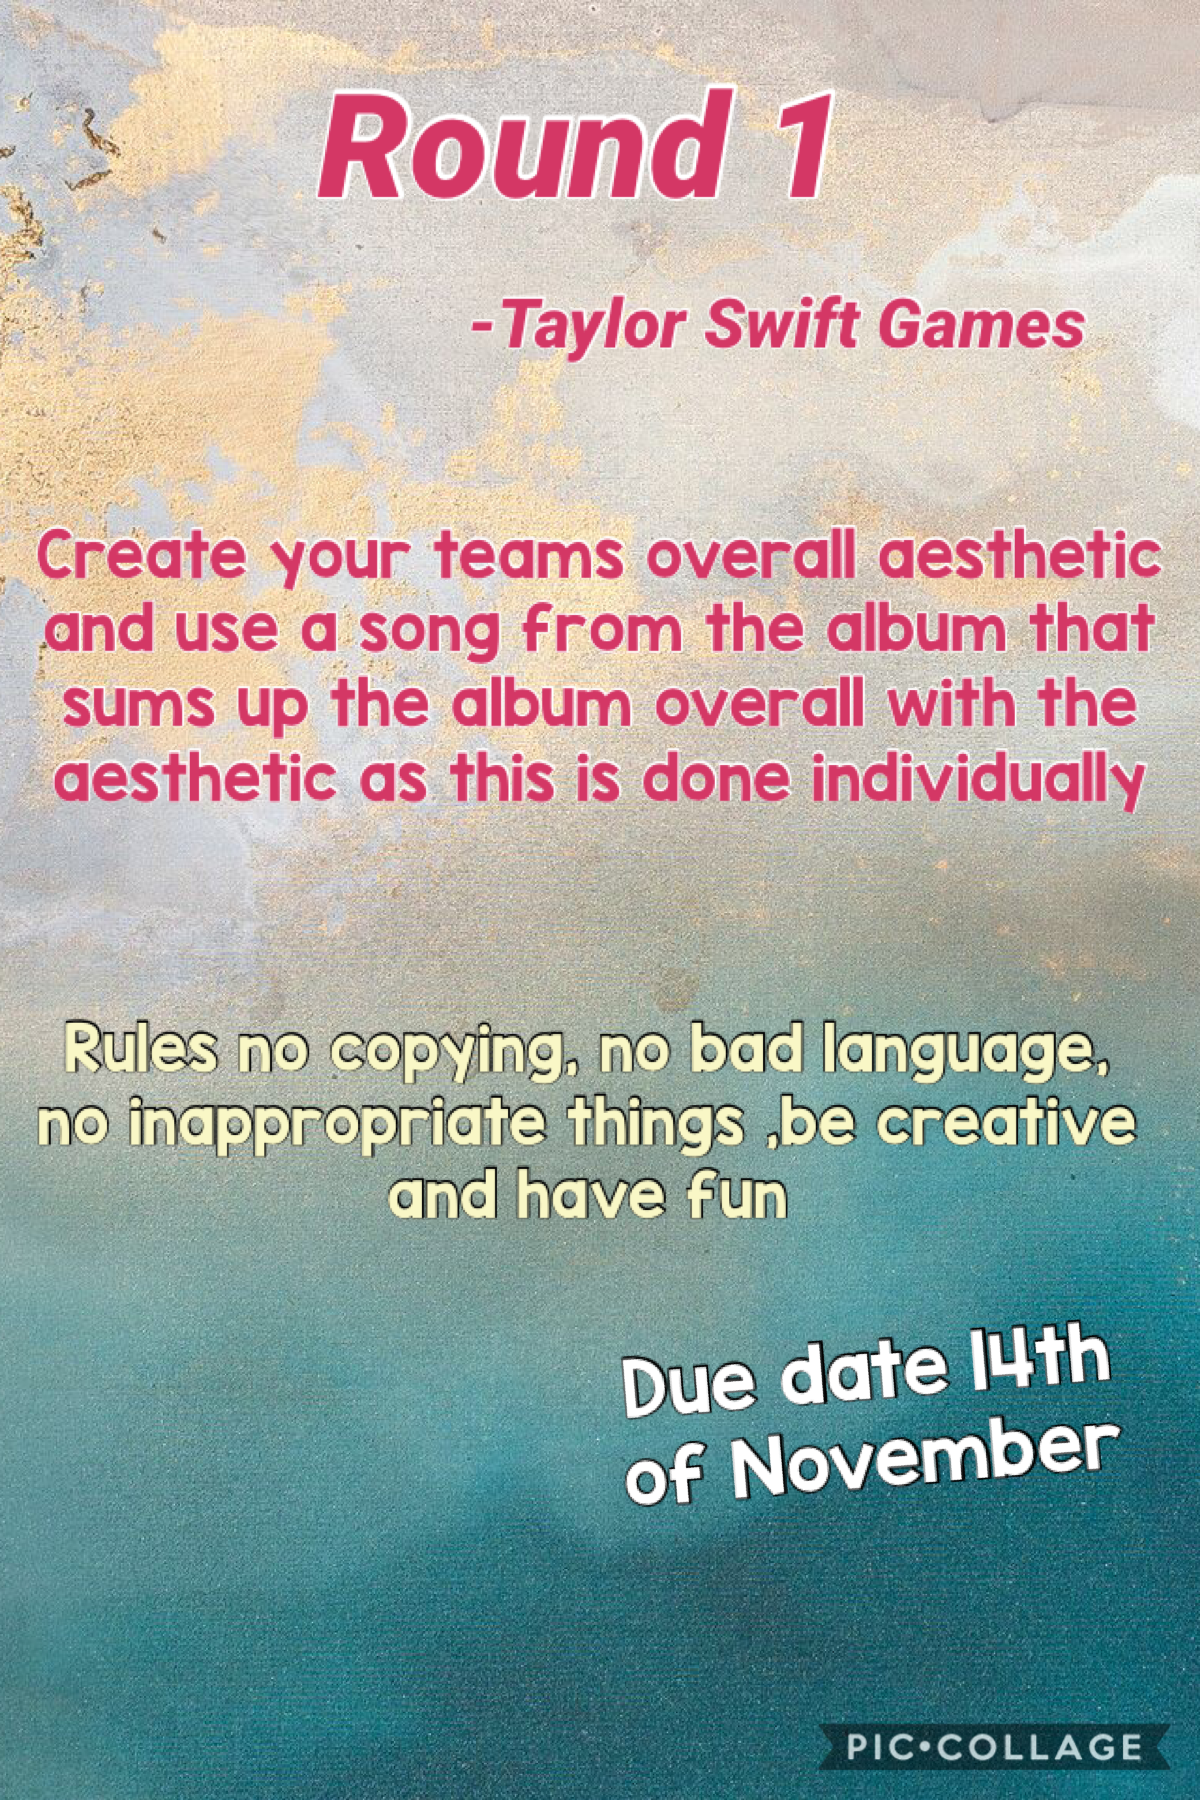 Round of the Taylor Swift games